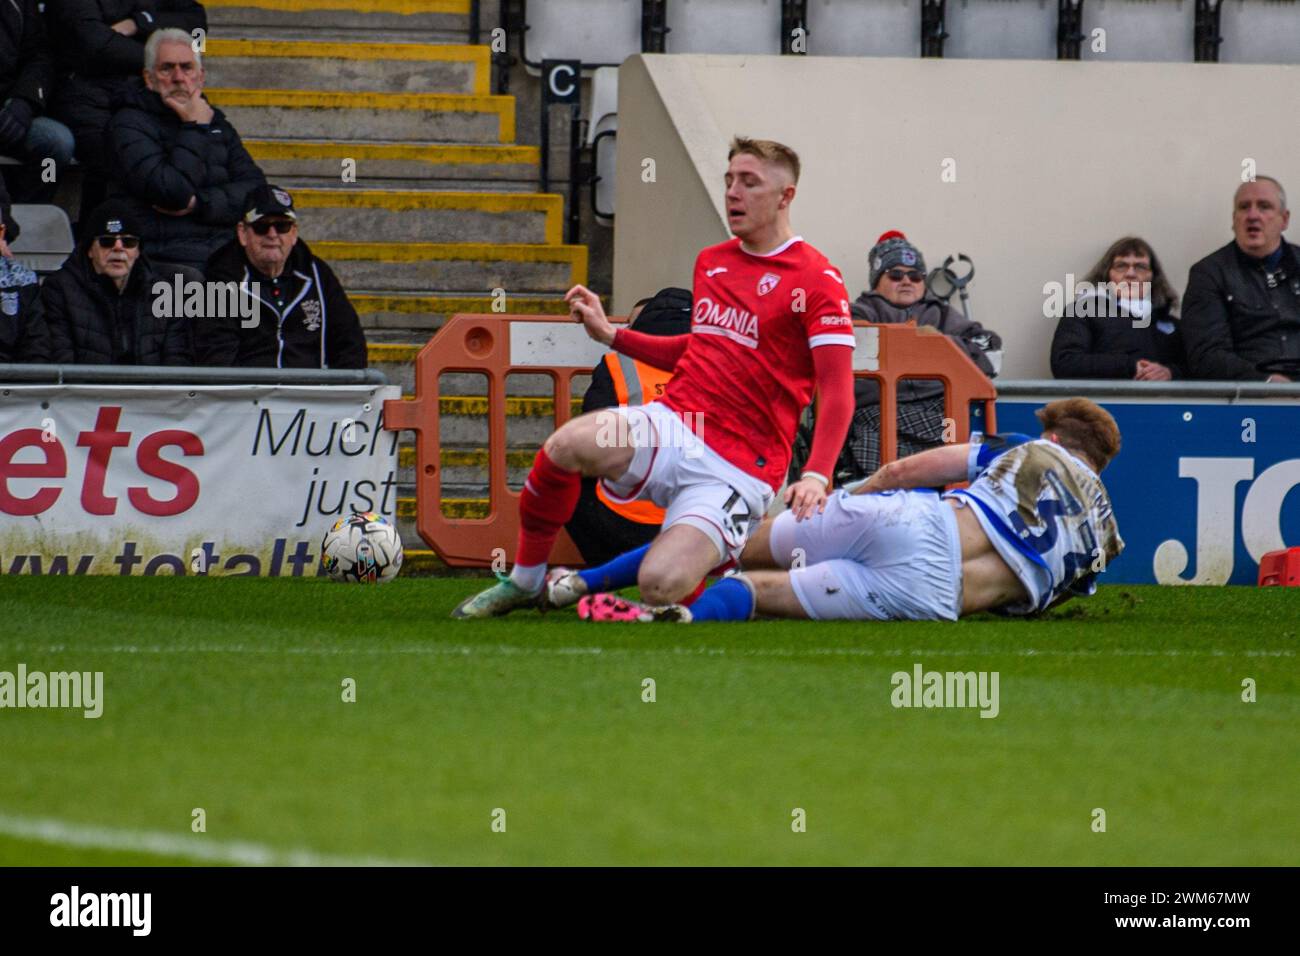 Morecambe on Saturday 24th February 2024. Grimsby Town's Denver Hume tackles Morecambe's Joel Senior during the Sky Bet League 2 match between Morecambe and Grimsby Town at the Globe Arena, Morecambe on Saturday 24th February 2024. (Photo: Ian Charles | MI News) Credit: MI News & Sport /Alamy Live News Stock Photo